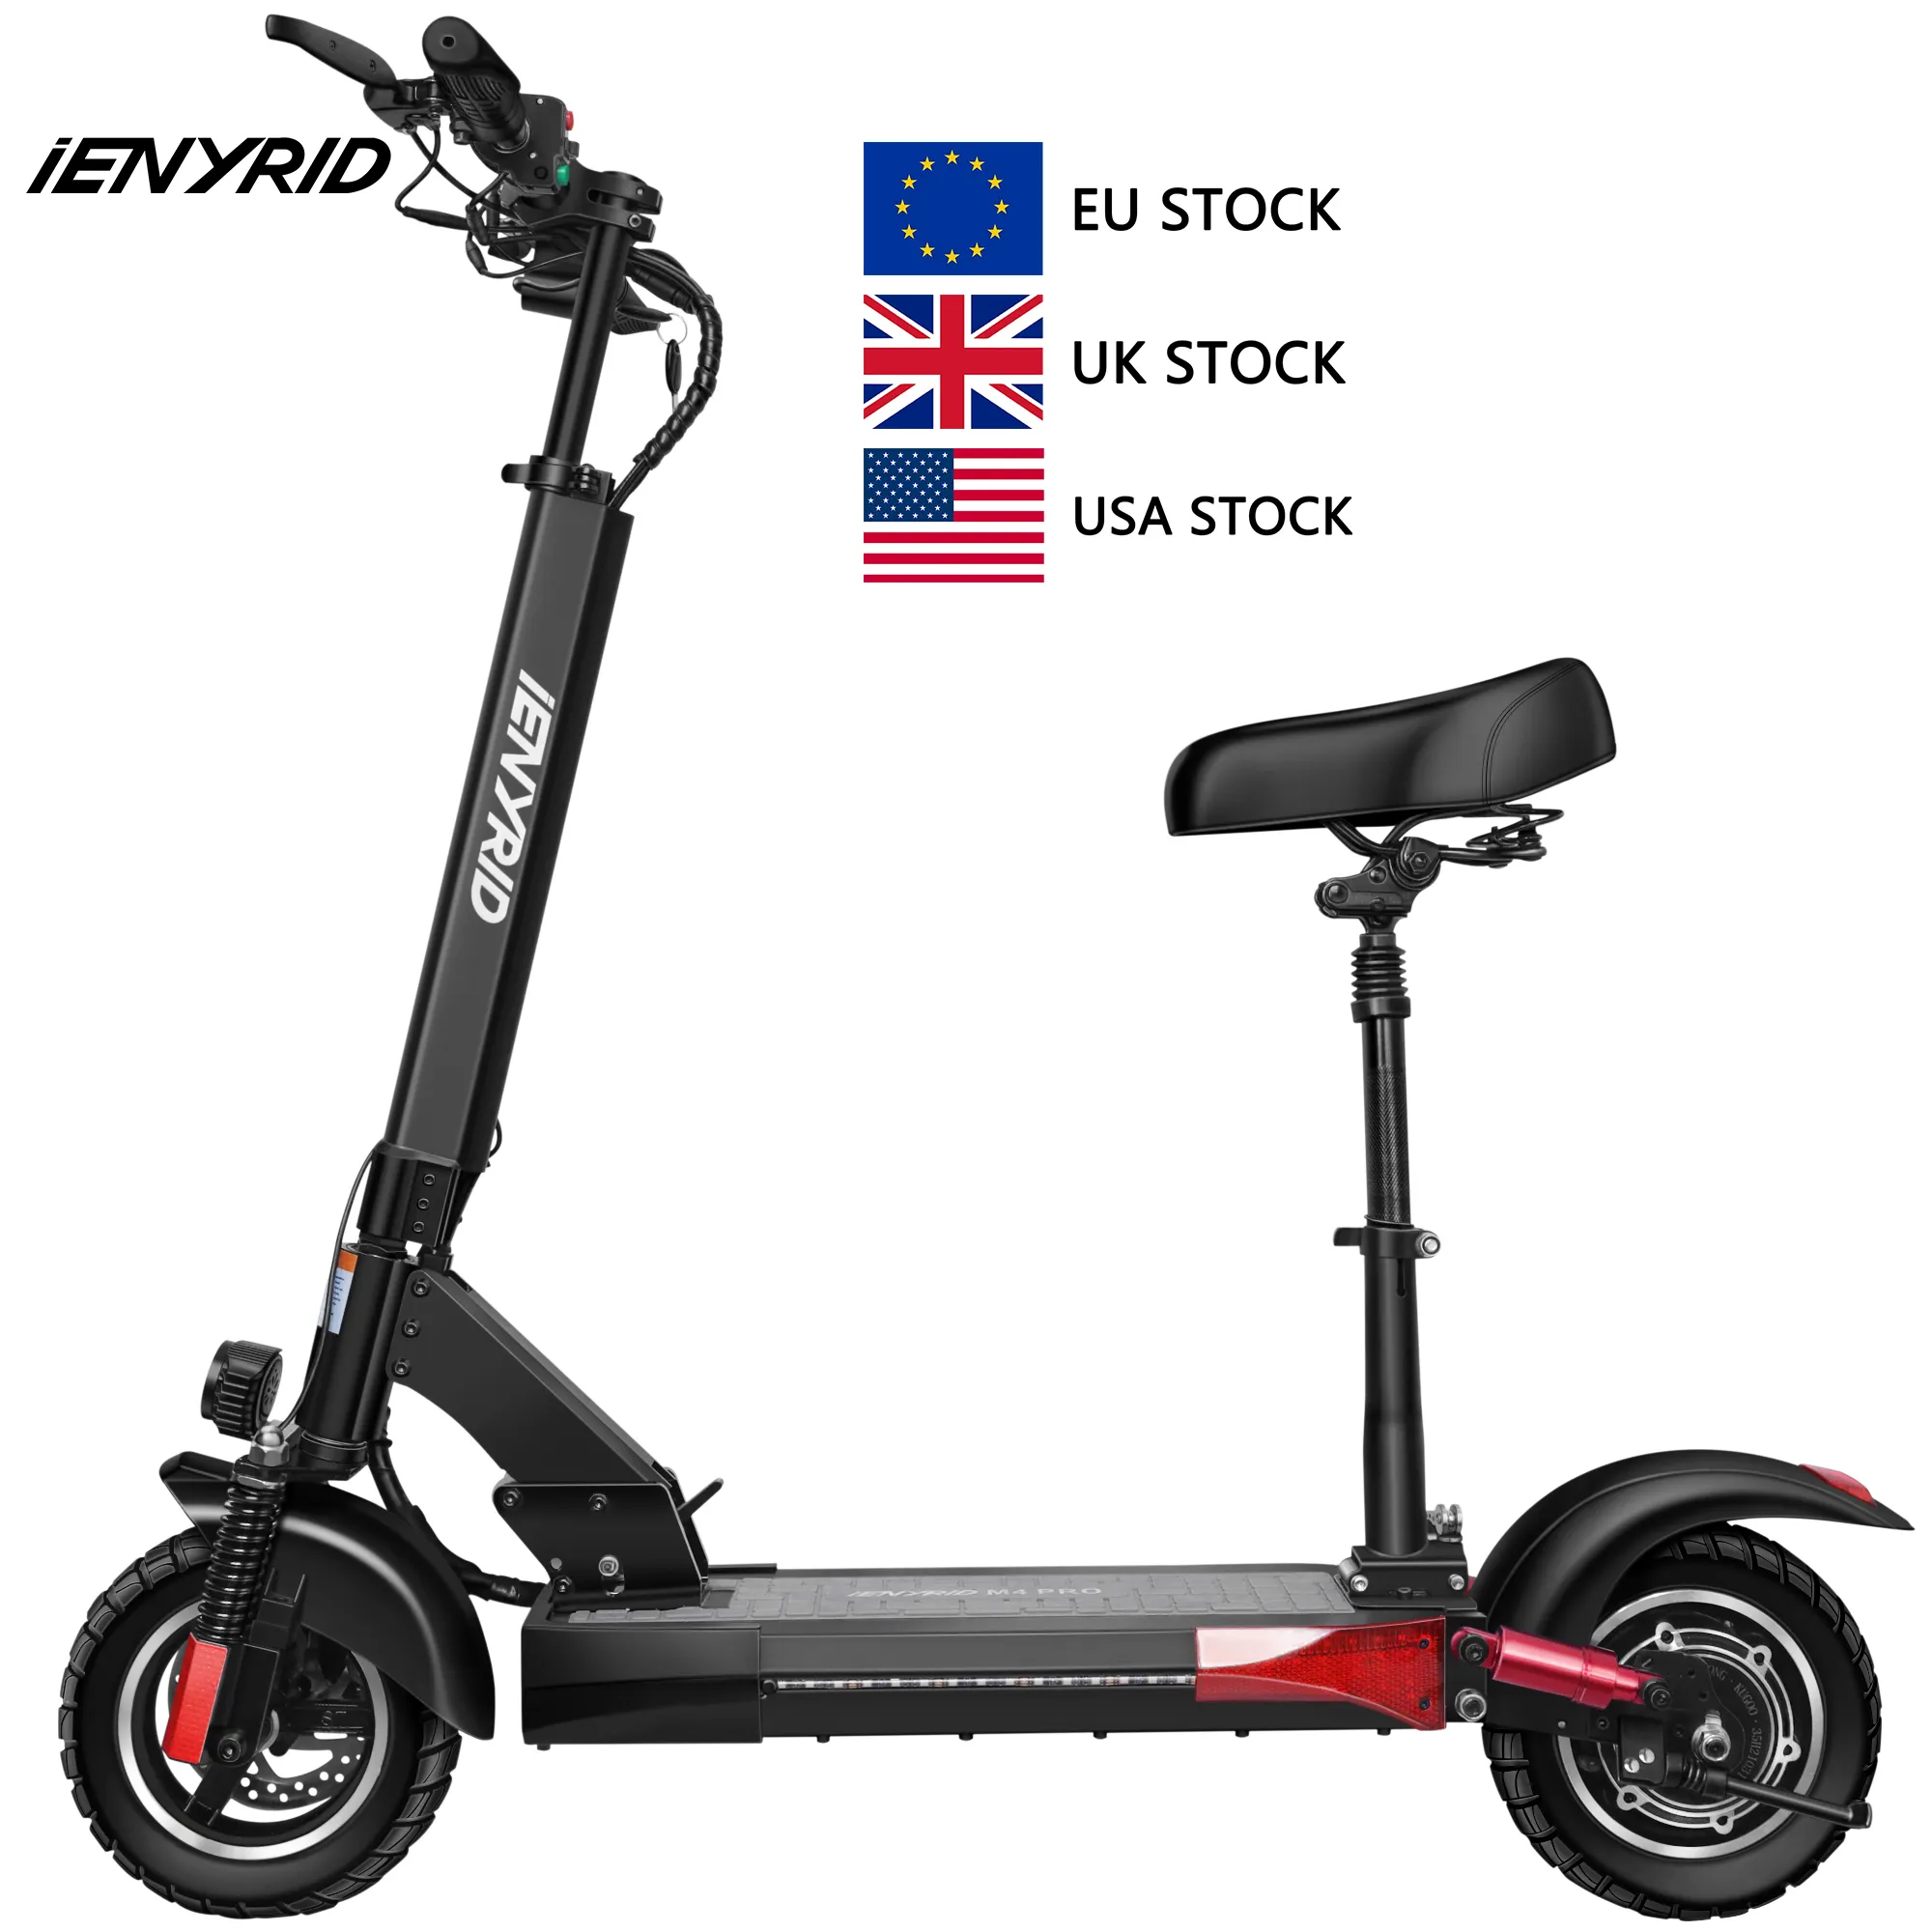 EU UK Oversea Warehouse Faster Delivery iENYRID M4 Pro electric scooter with seat 10" 500w motor off-road electric scooter sale